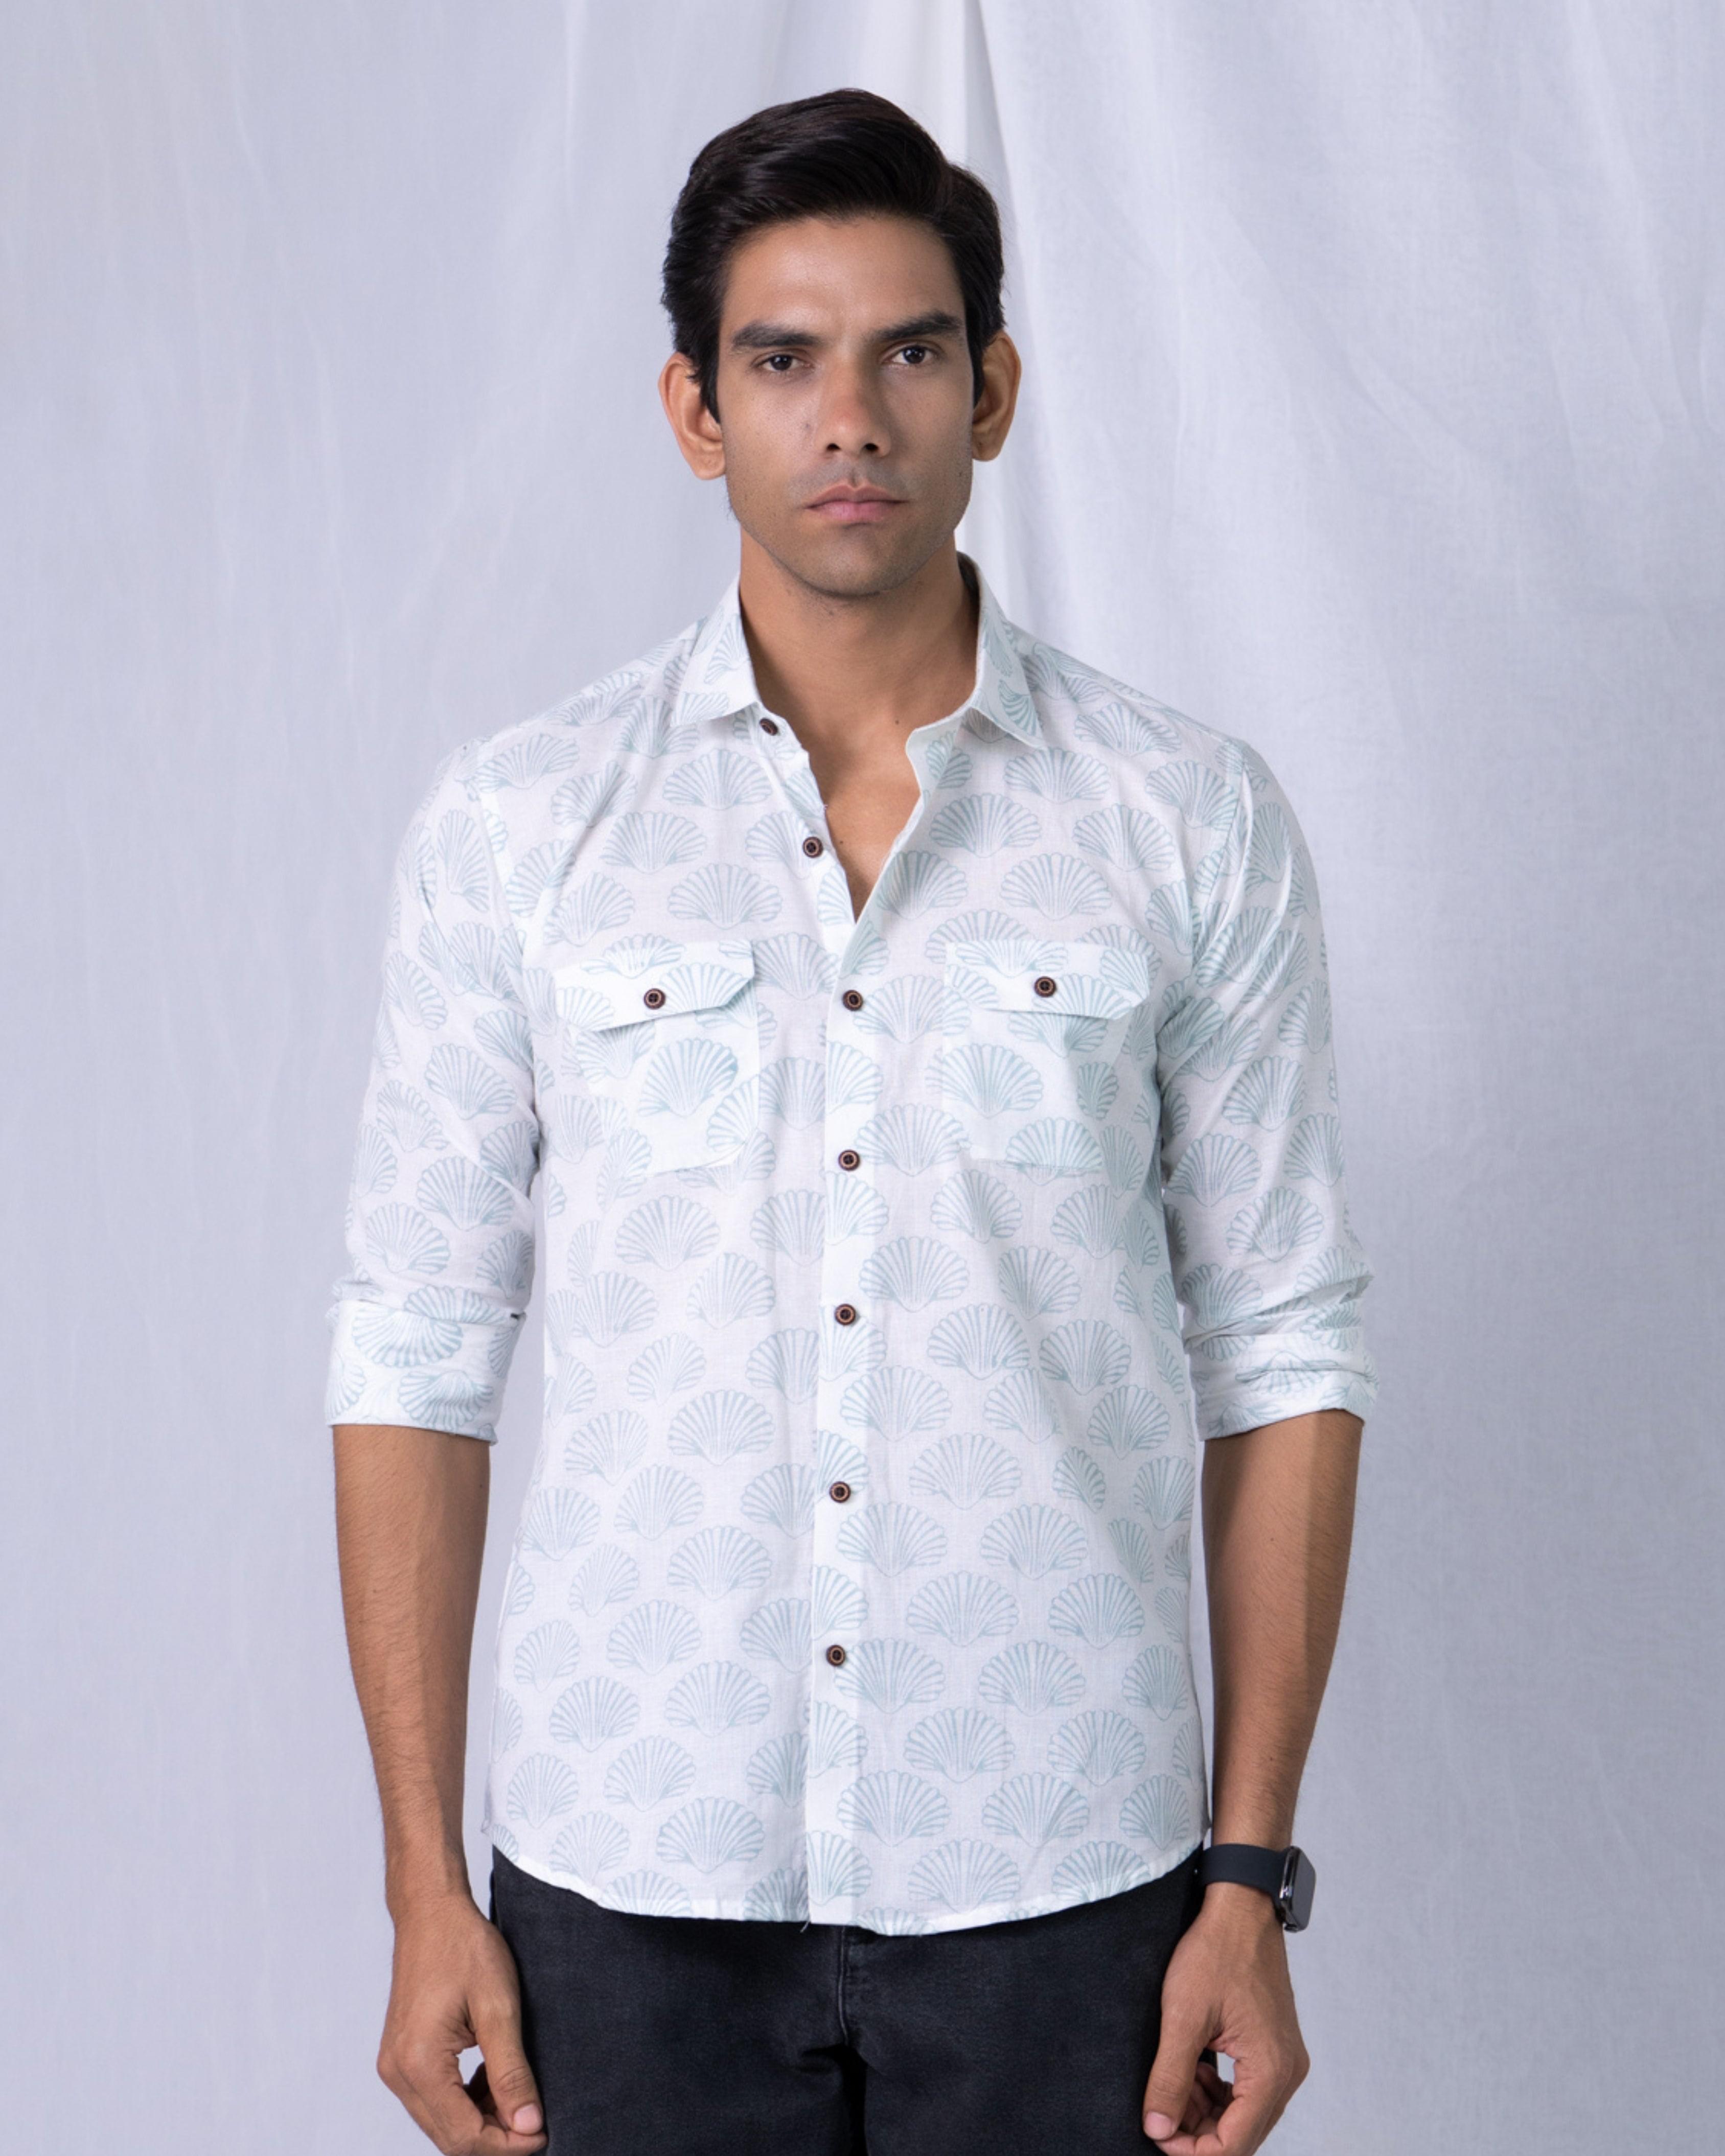 Firangi Yarn 100% Cotton Block Printed Sea Shell Casual Full Sleeves With Flap Pockets Men's Party Wear Shirt Blue/White